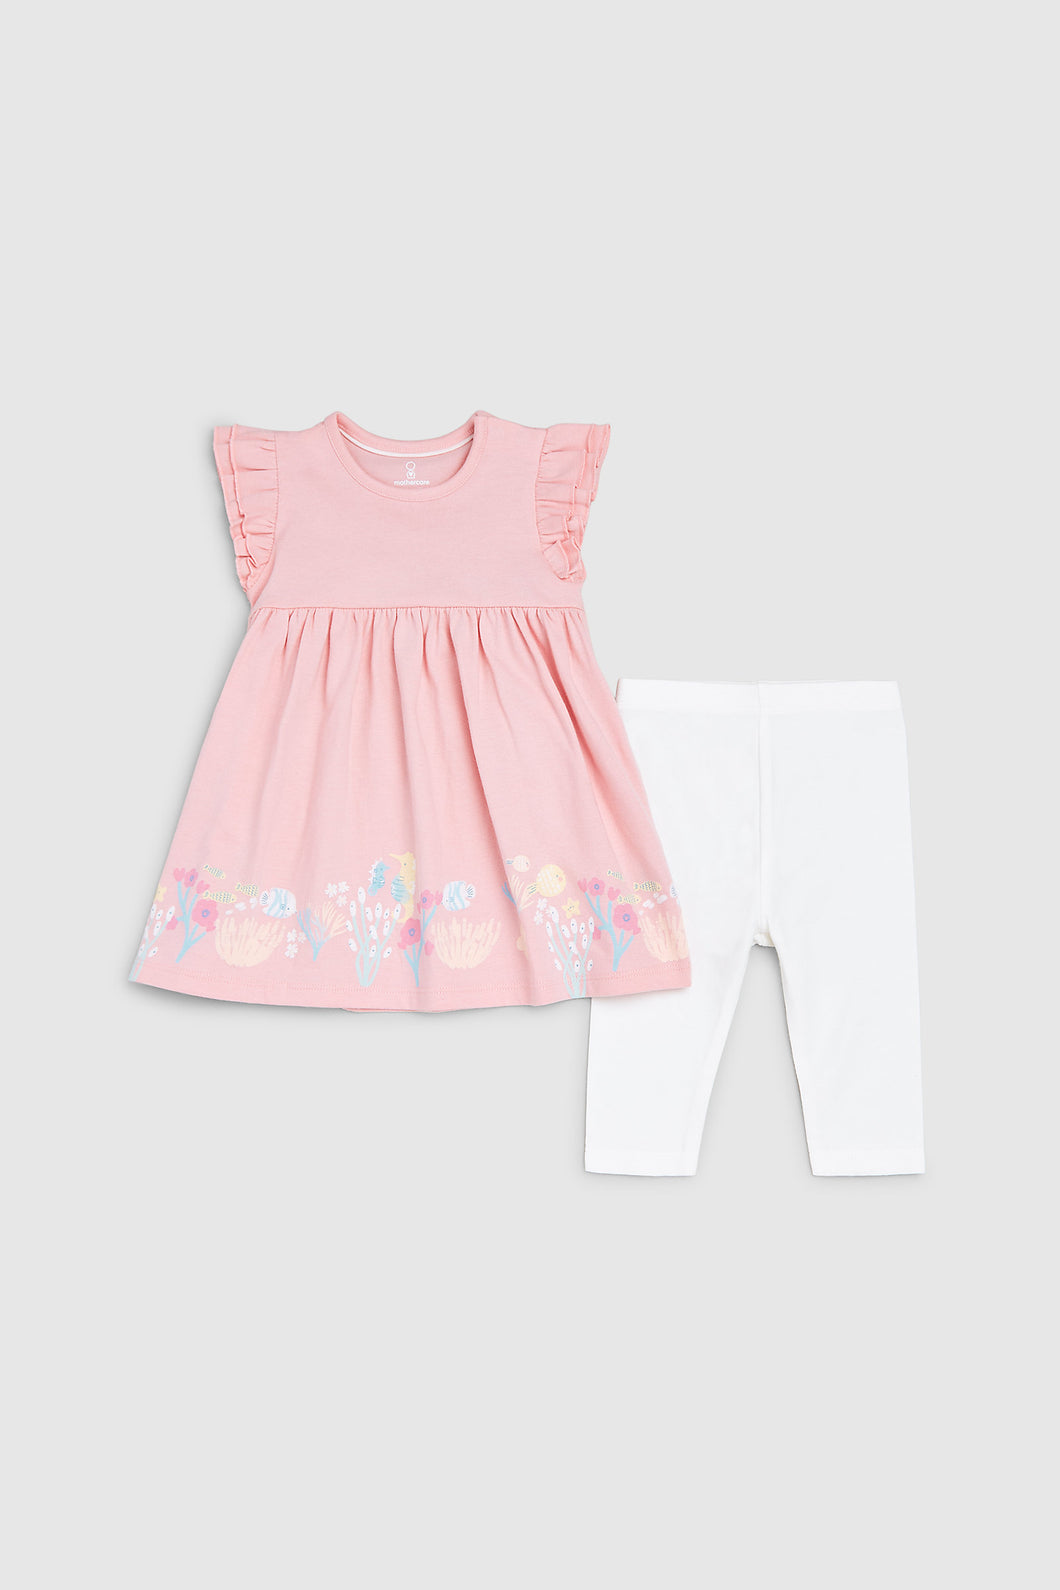 Mothercare Pink Dress And Leggings Set